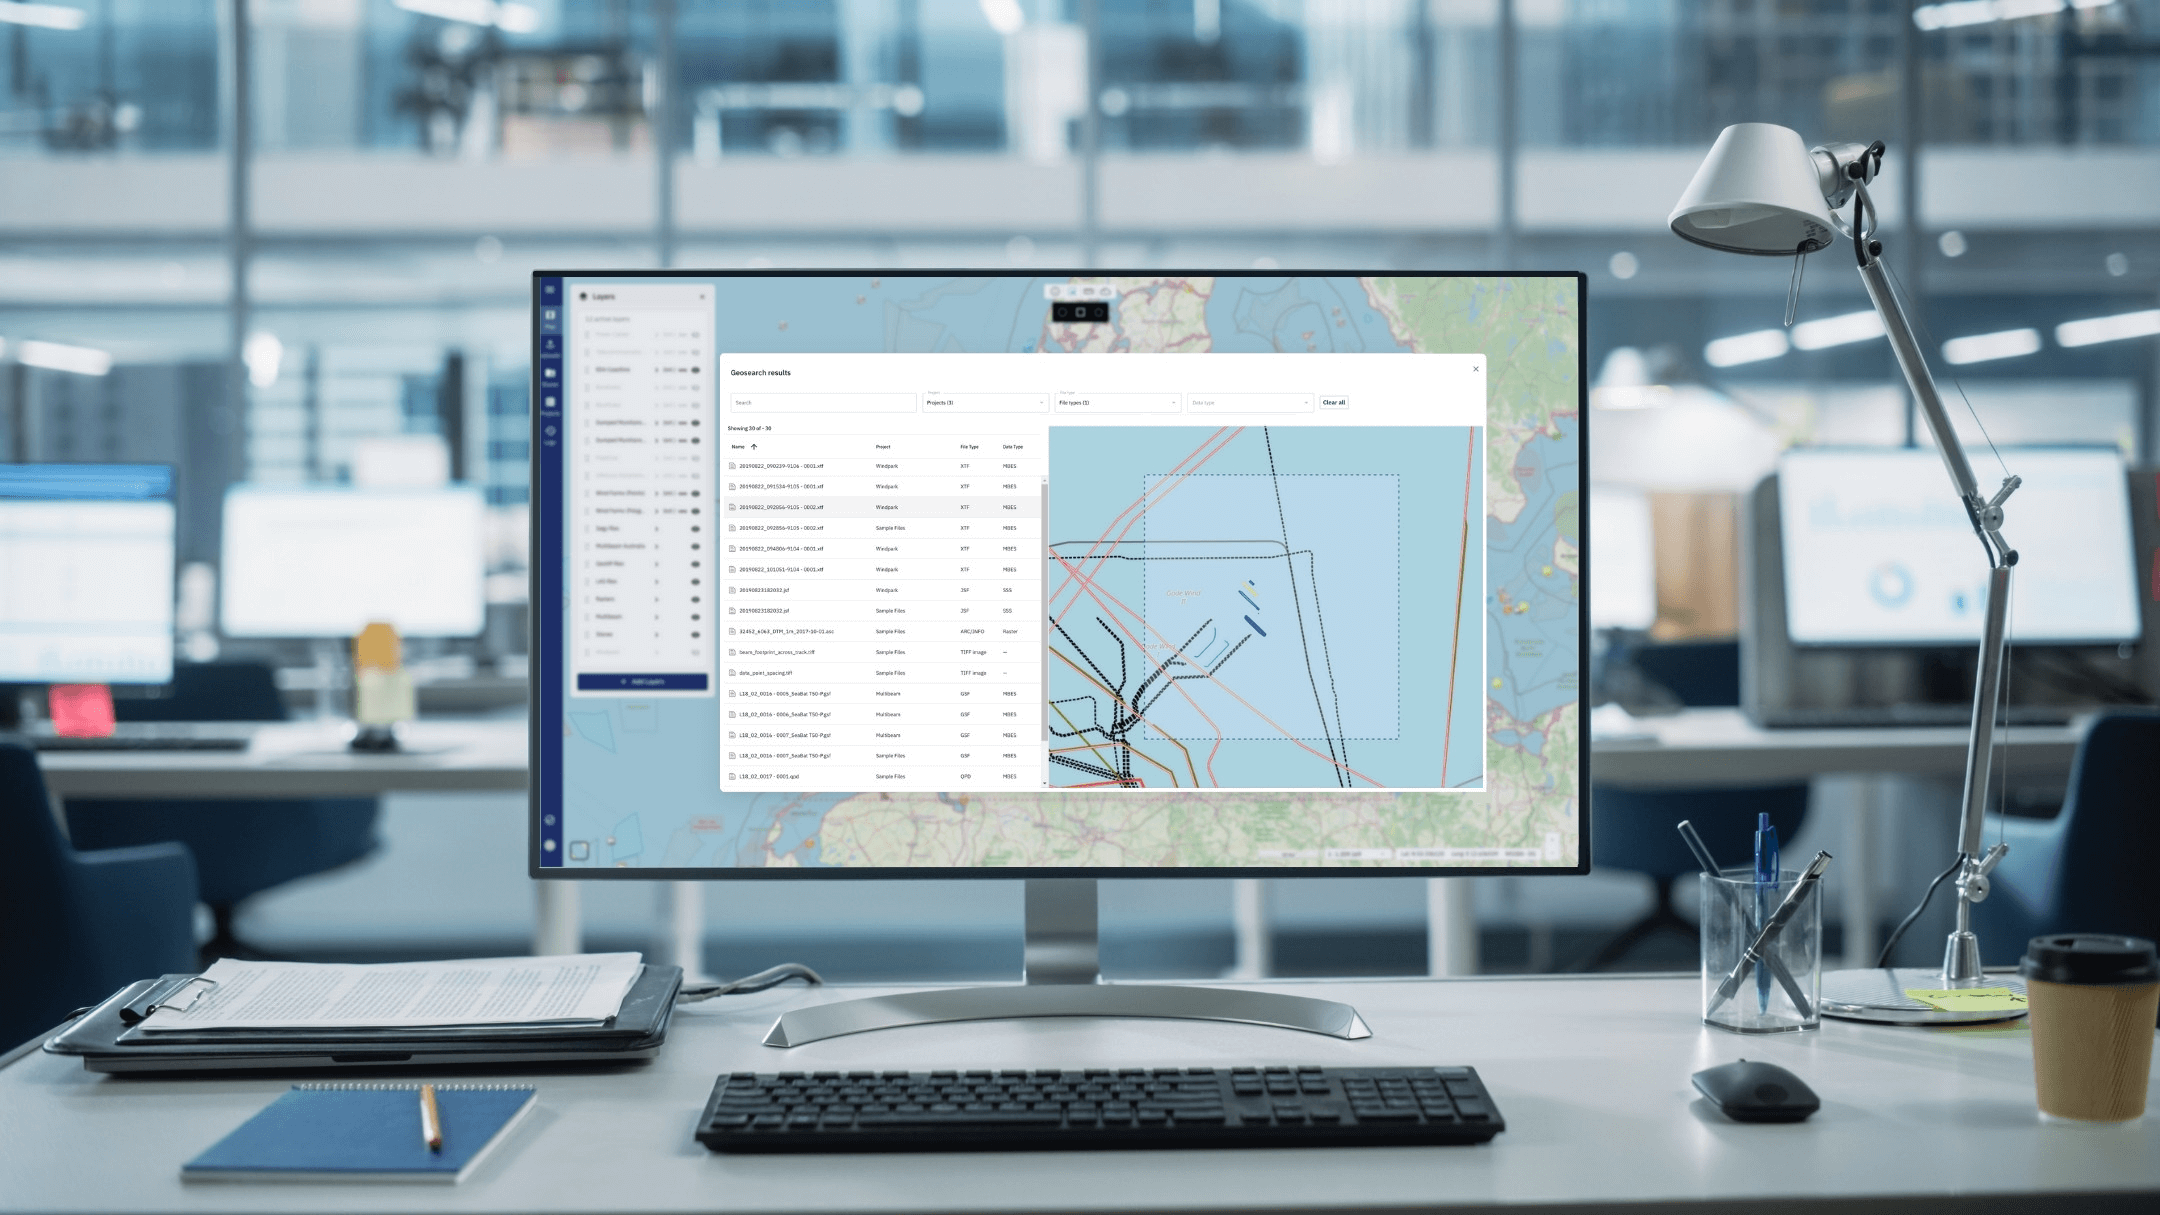 The geospatial search function shows multiple types of data in the TrueOcean marine data platform